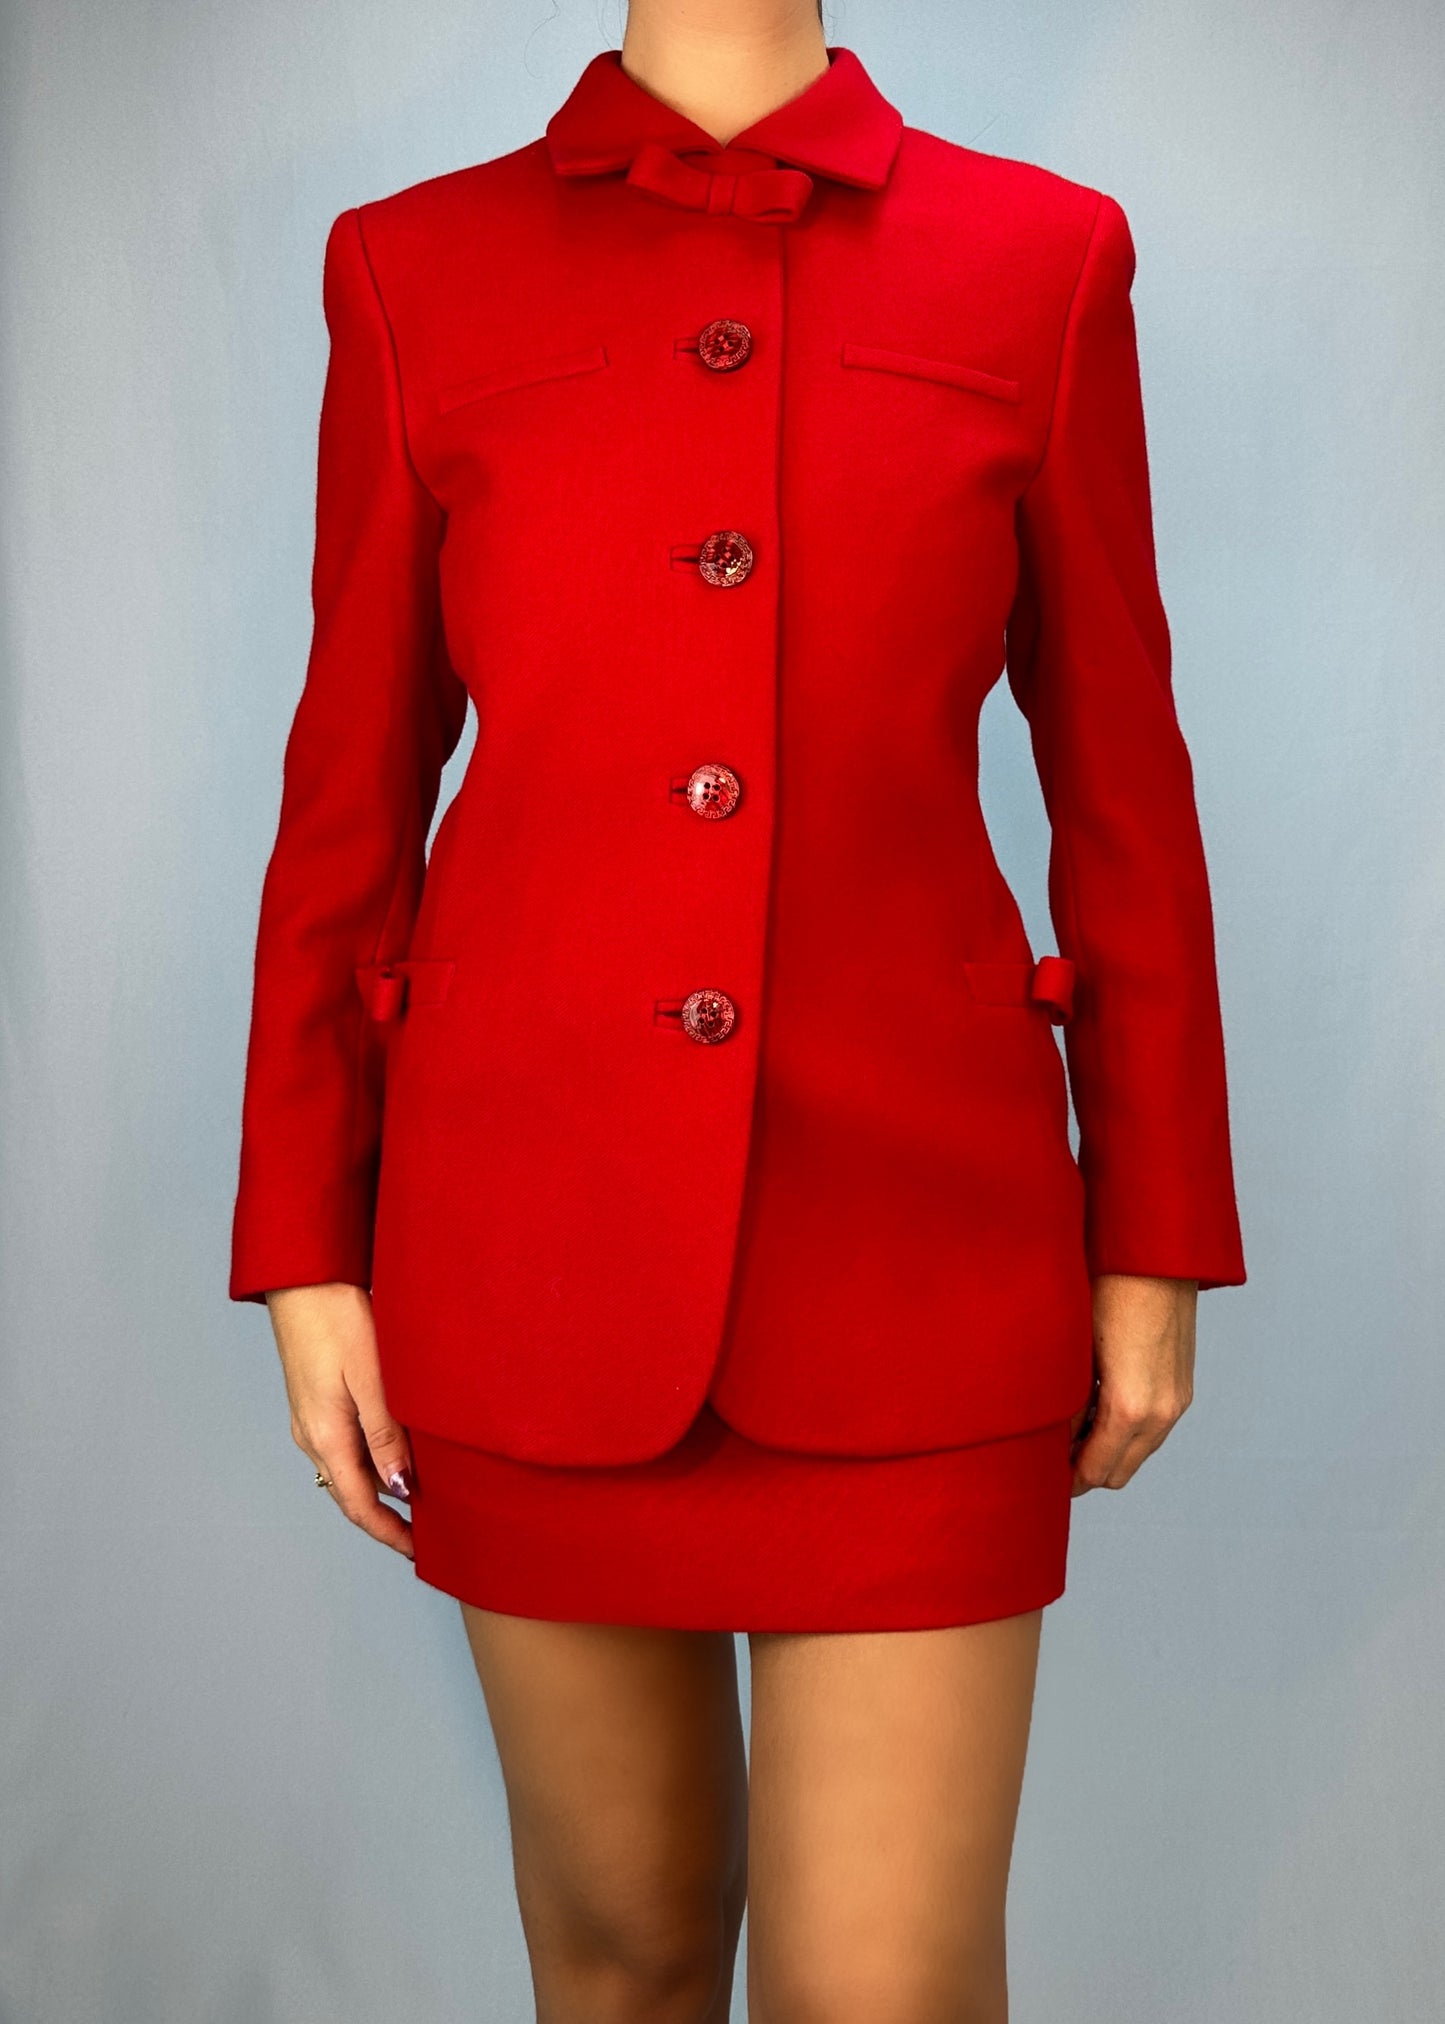 Versace Red Bow Jacket & Skirt Suit Set